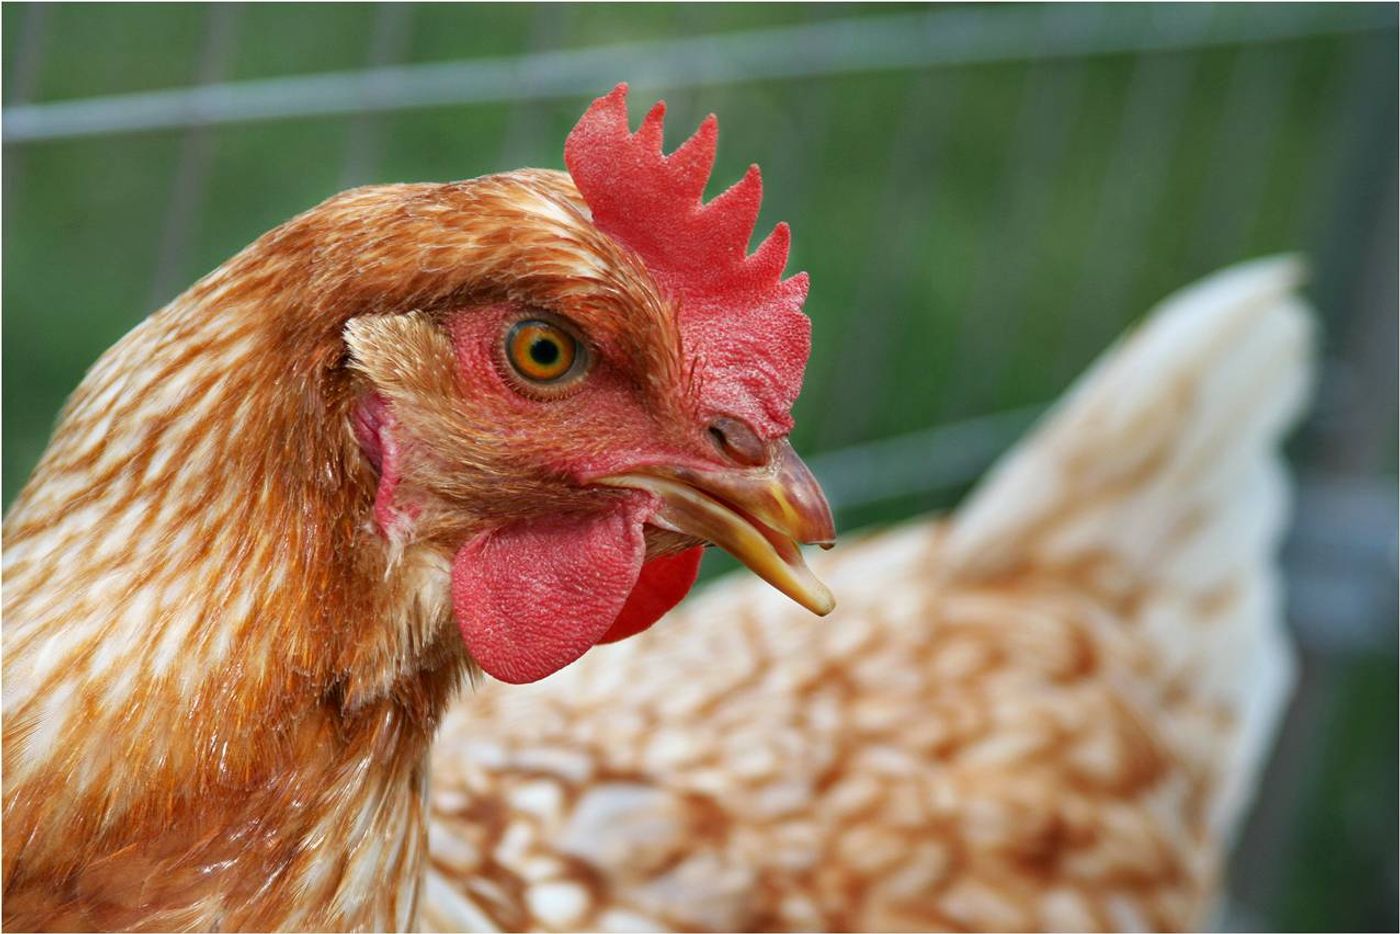 Chickens engineered to produce 'farmaceutical' drugs treat lysosomal disease.